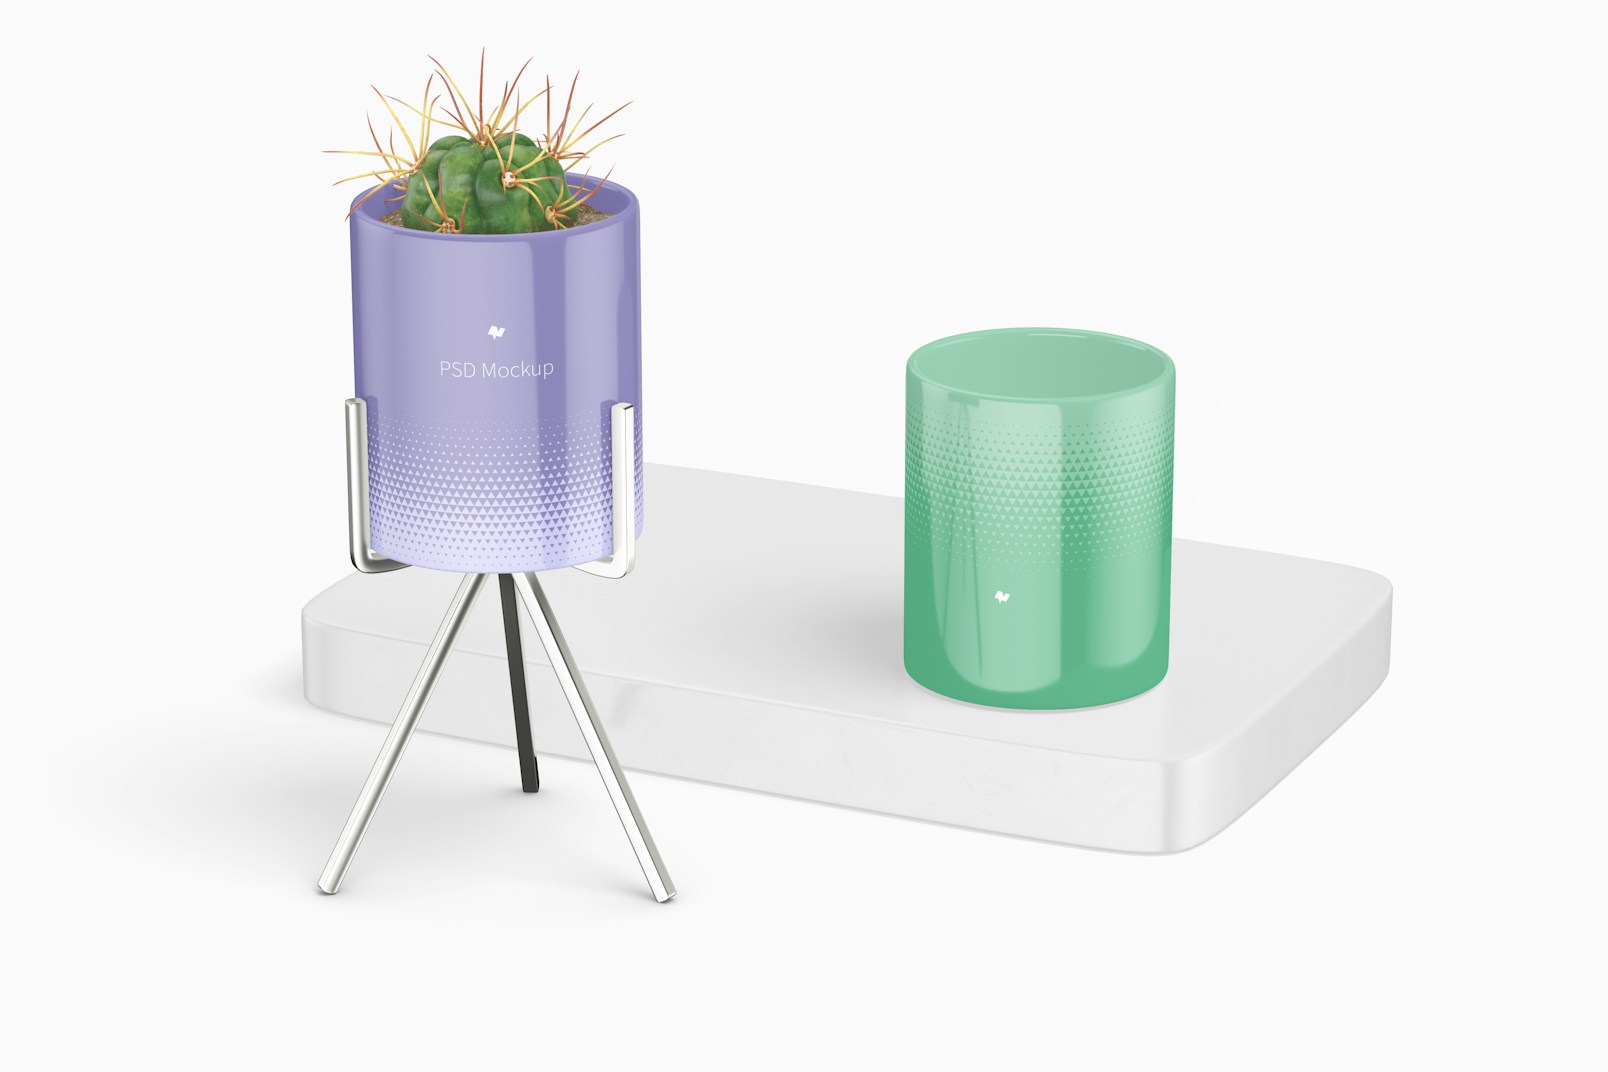 Flower Pot with Metal Stand Mockup, Perspective